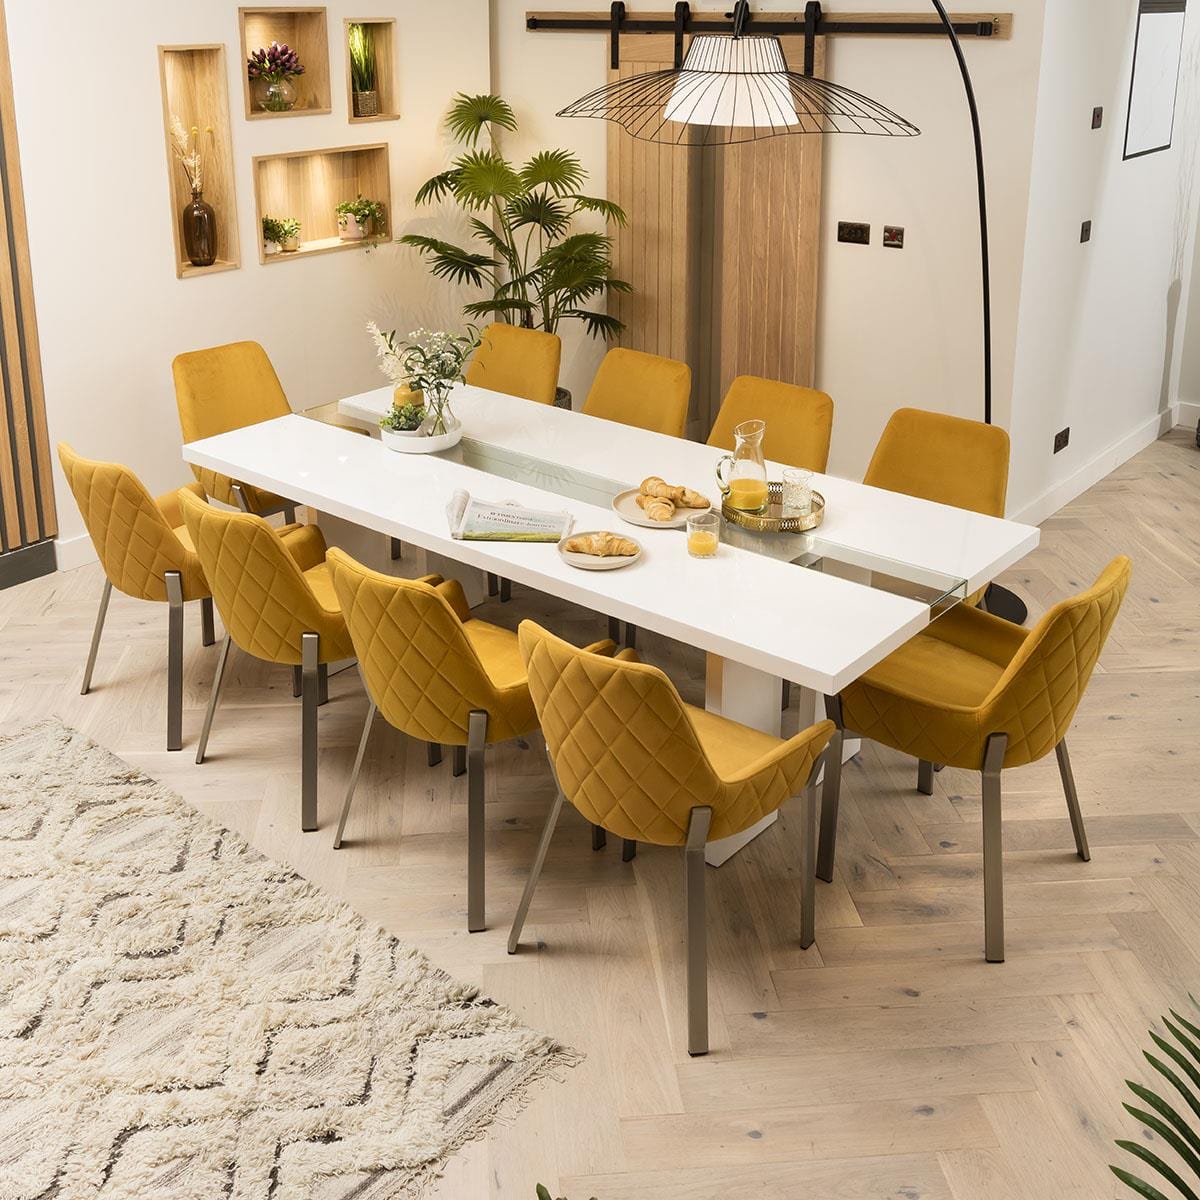 Quatropi Luna 10 Seater Dining Table and Chairs White Mustard